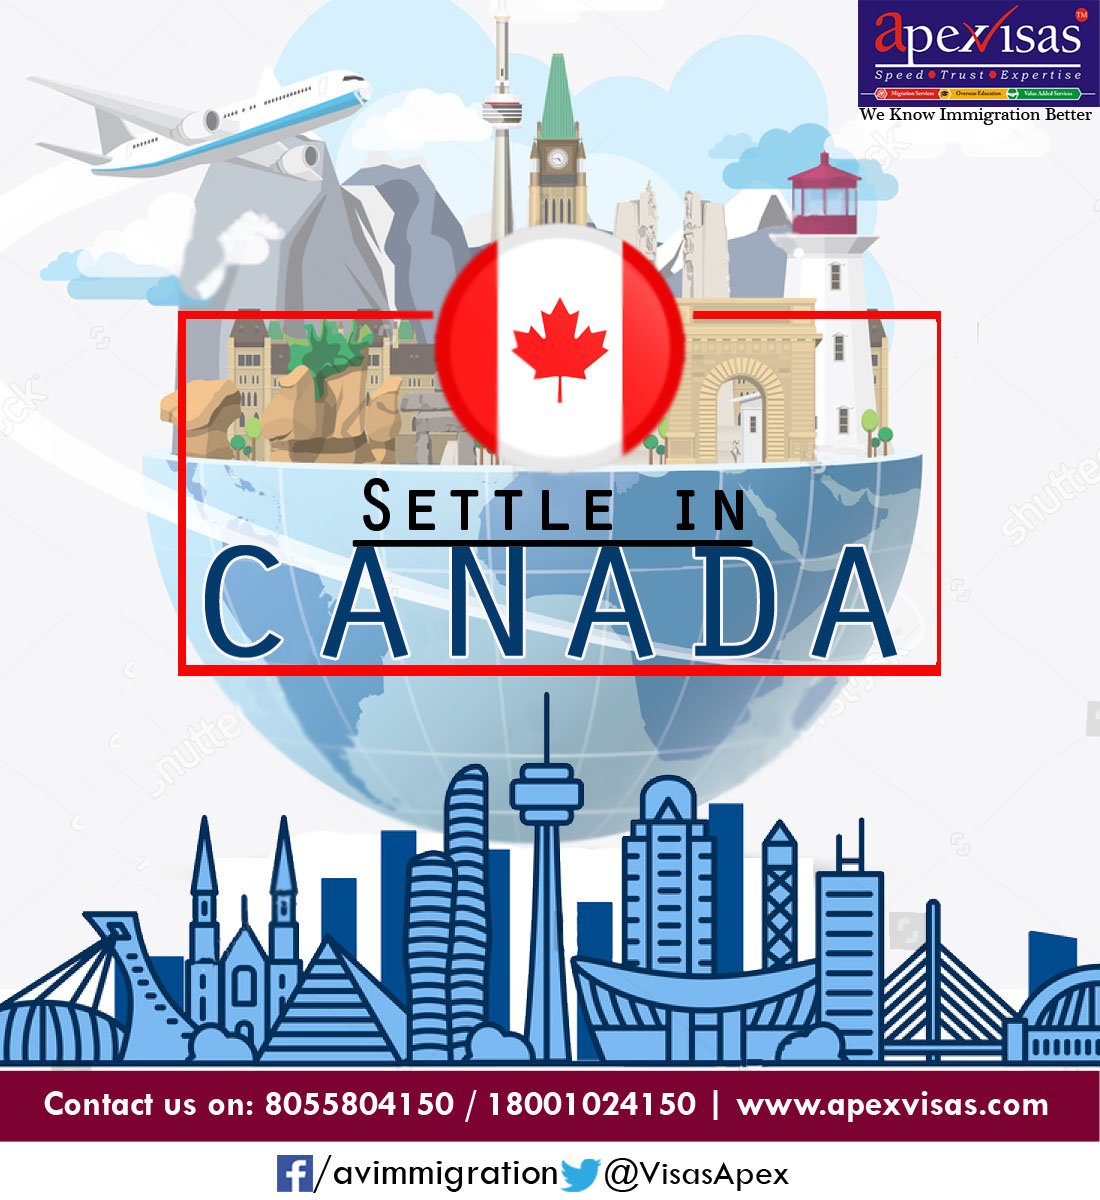 Settle in #Canada as a New Immigrant on permanent basis.
If you are looking for #Canadaimmigrationconsultants on how to apply for #CandaPRVisa contact us on: 8055804150 / 18001024150
apexvisas.com
#ApexVisas #LiveinCanada #ImmigrationToCanada